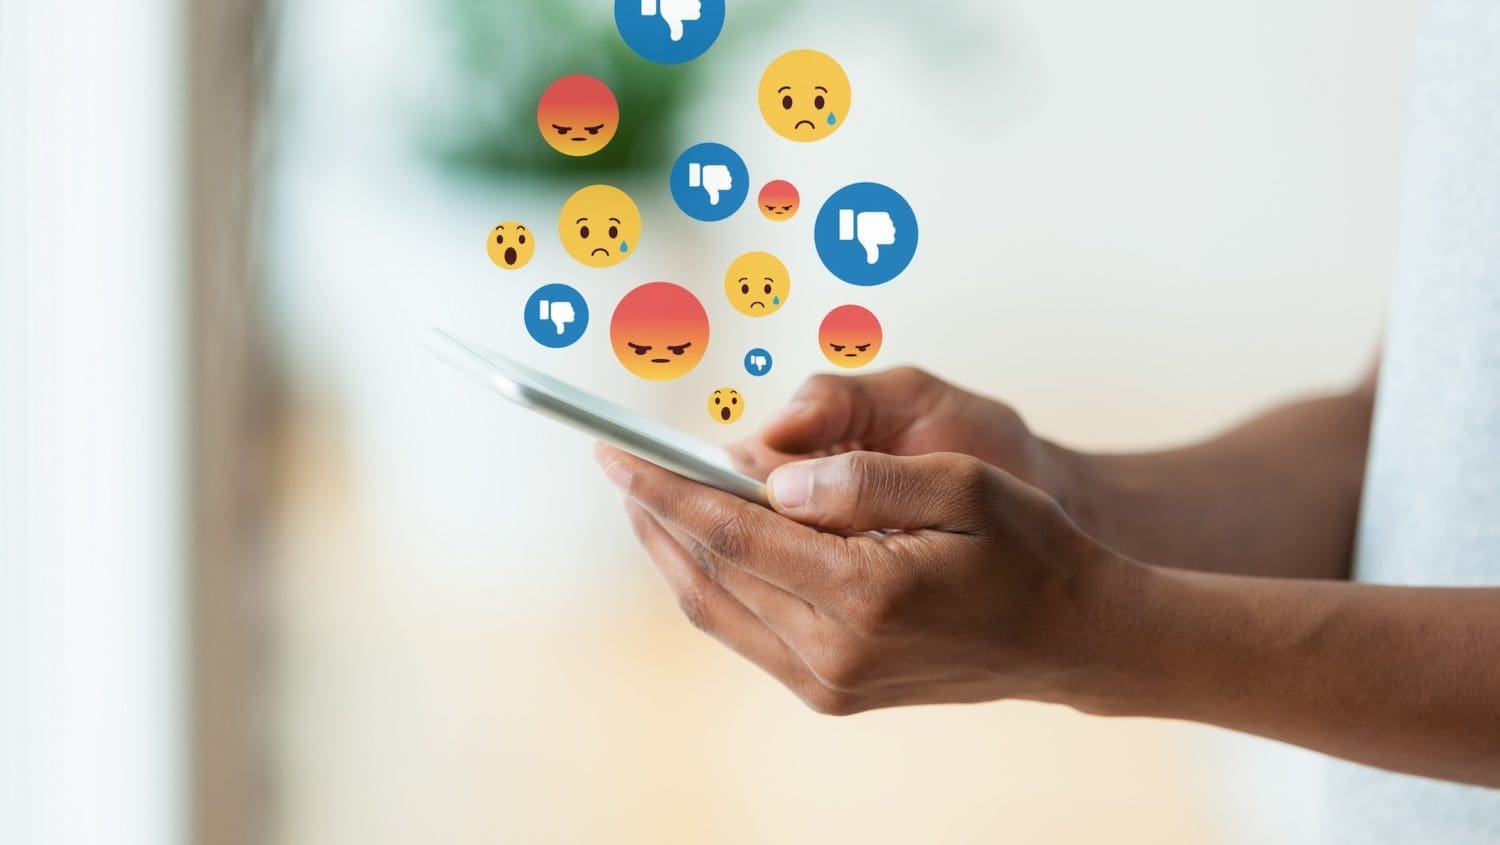 A person holding a smartphone with emoticons coming out of it, illustrating the negative impacts of social media on business.